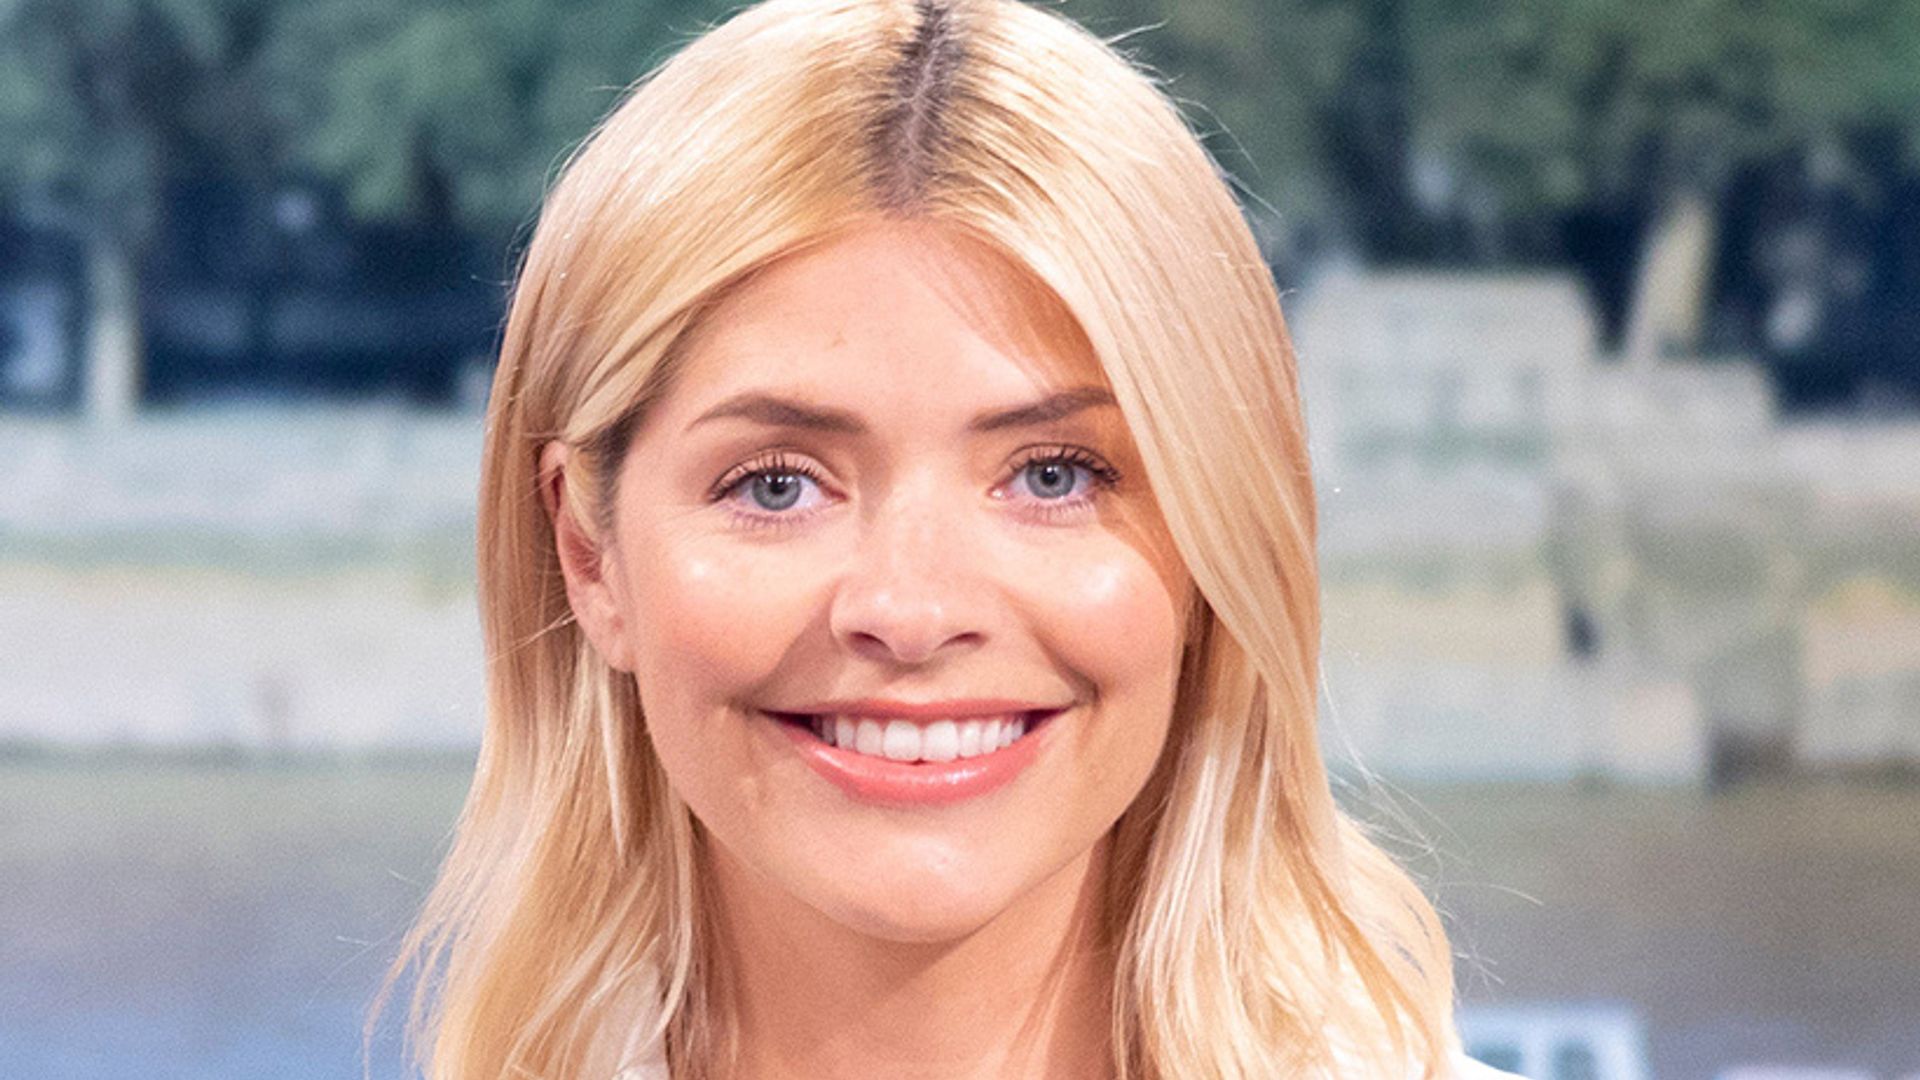 Holly Willoughby channels back-to-school vibe with chic dress by Zara